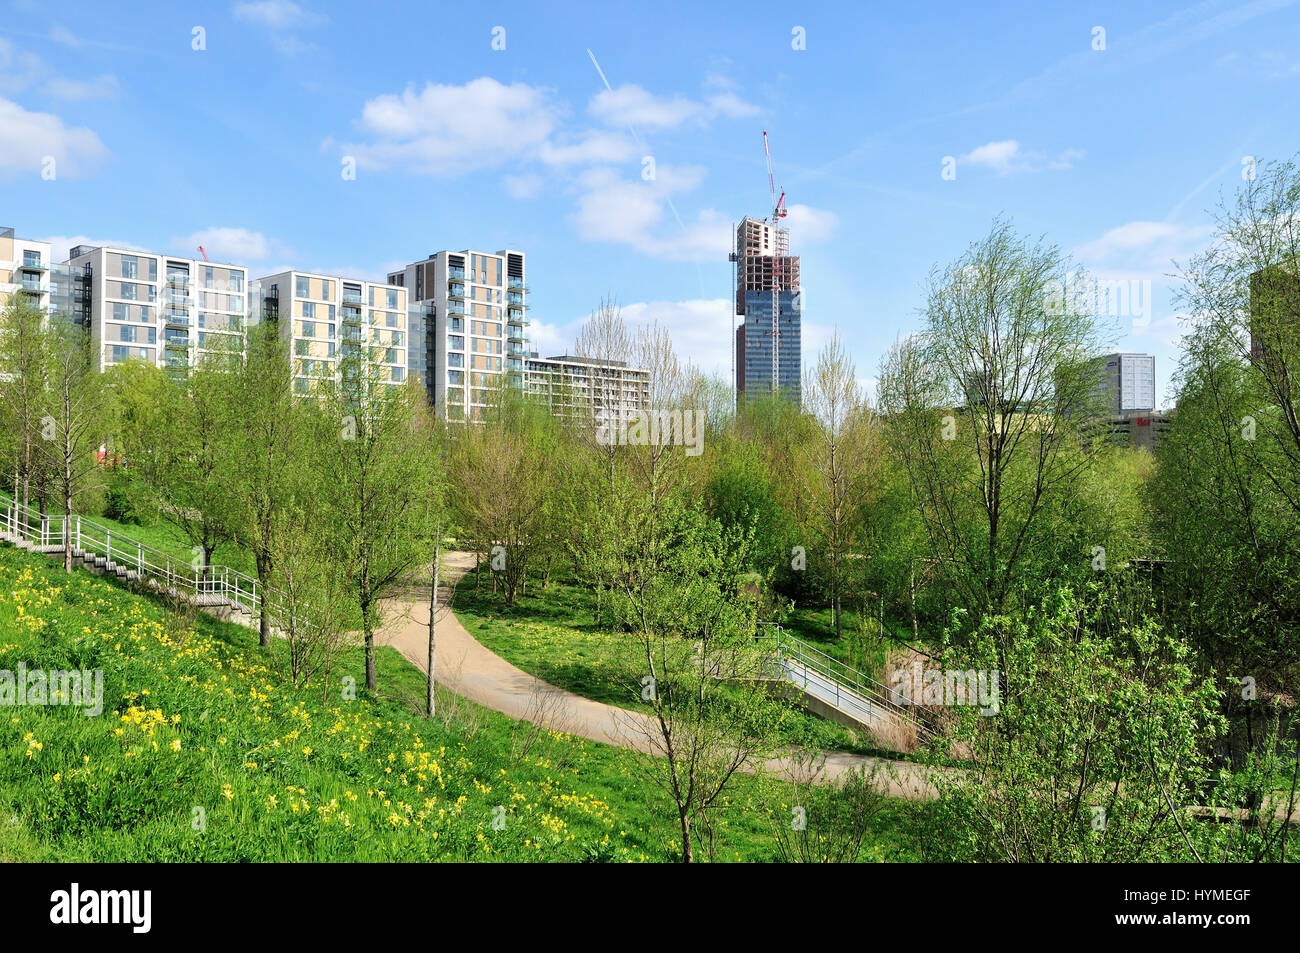 New apartment buildings and landscaping at Stratford in London's East End, UK Stock Photo